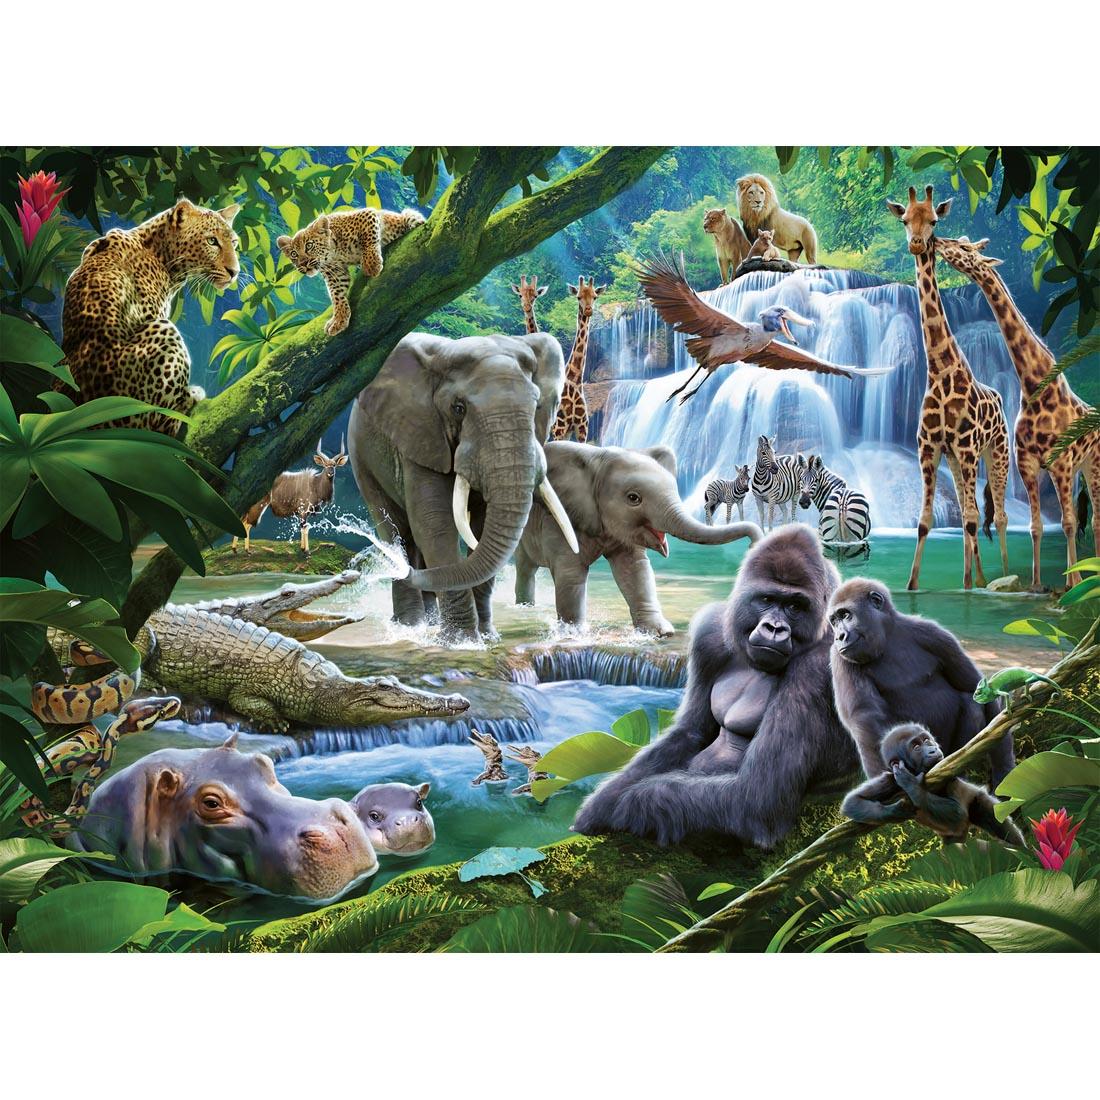 Jungle Animals 100-Piece Puzzle by Ravensburger